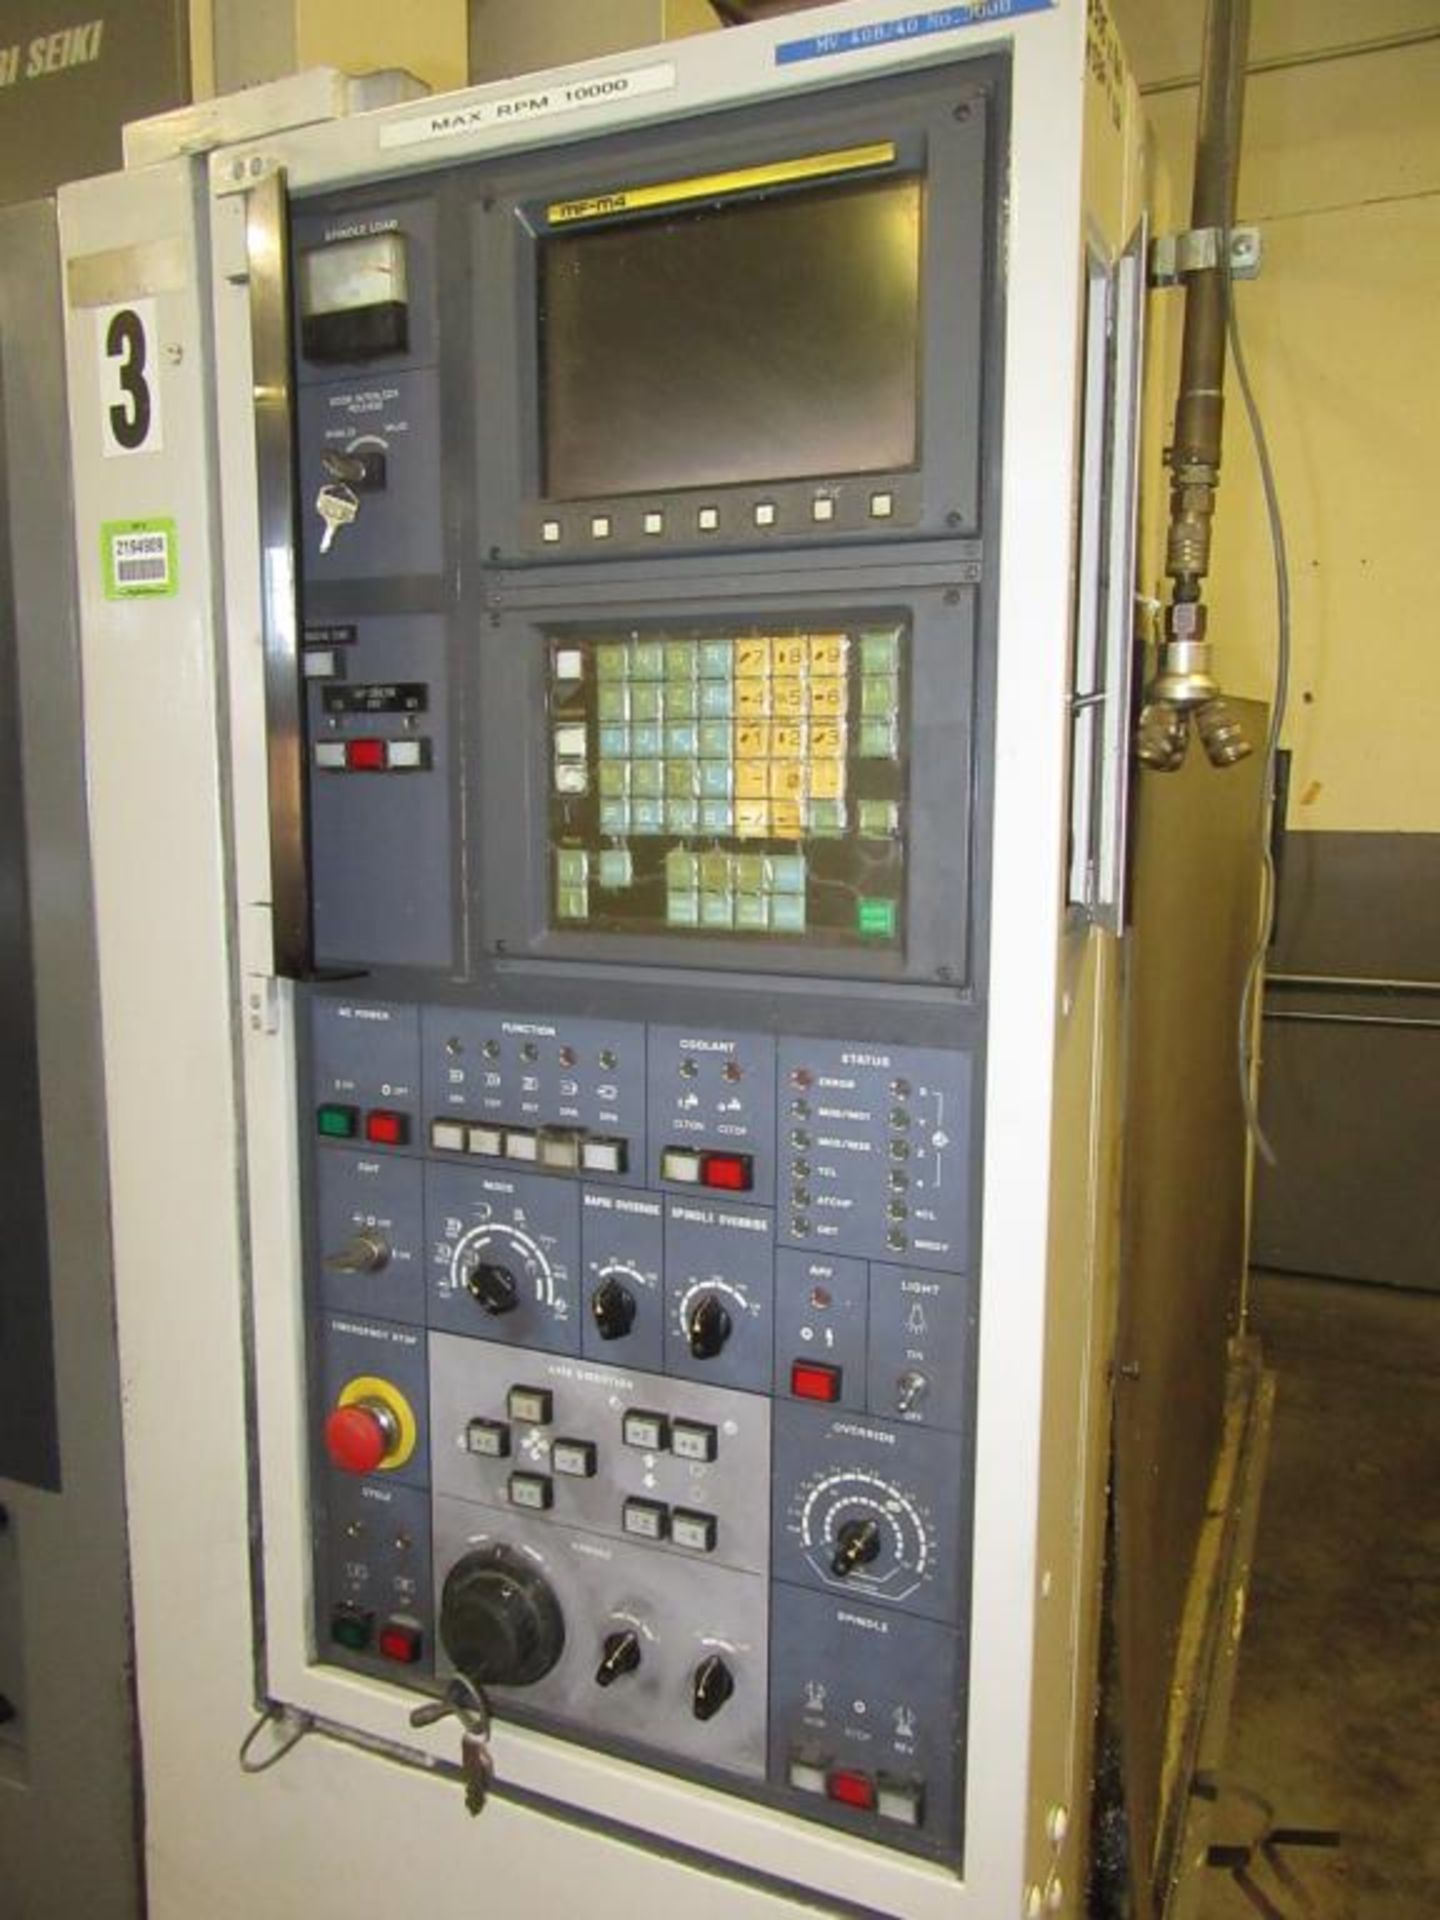 Mori Seiki MV-40B 1991 - CNC Vertical Machining Center with MF-M4 3-Axis Control Panel, Table Size - Image 3 of 12